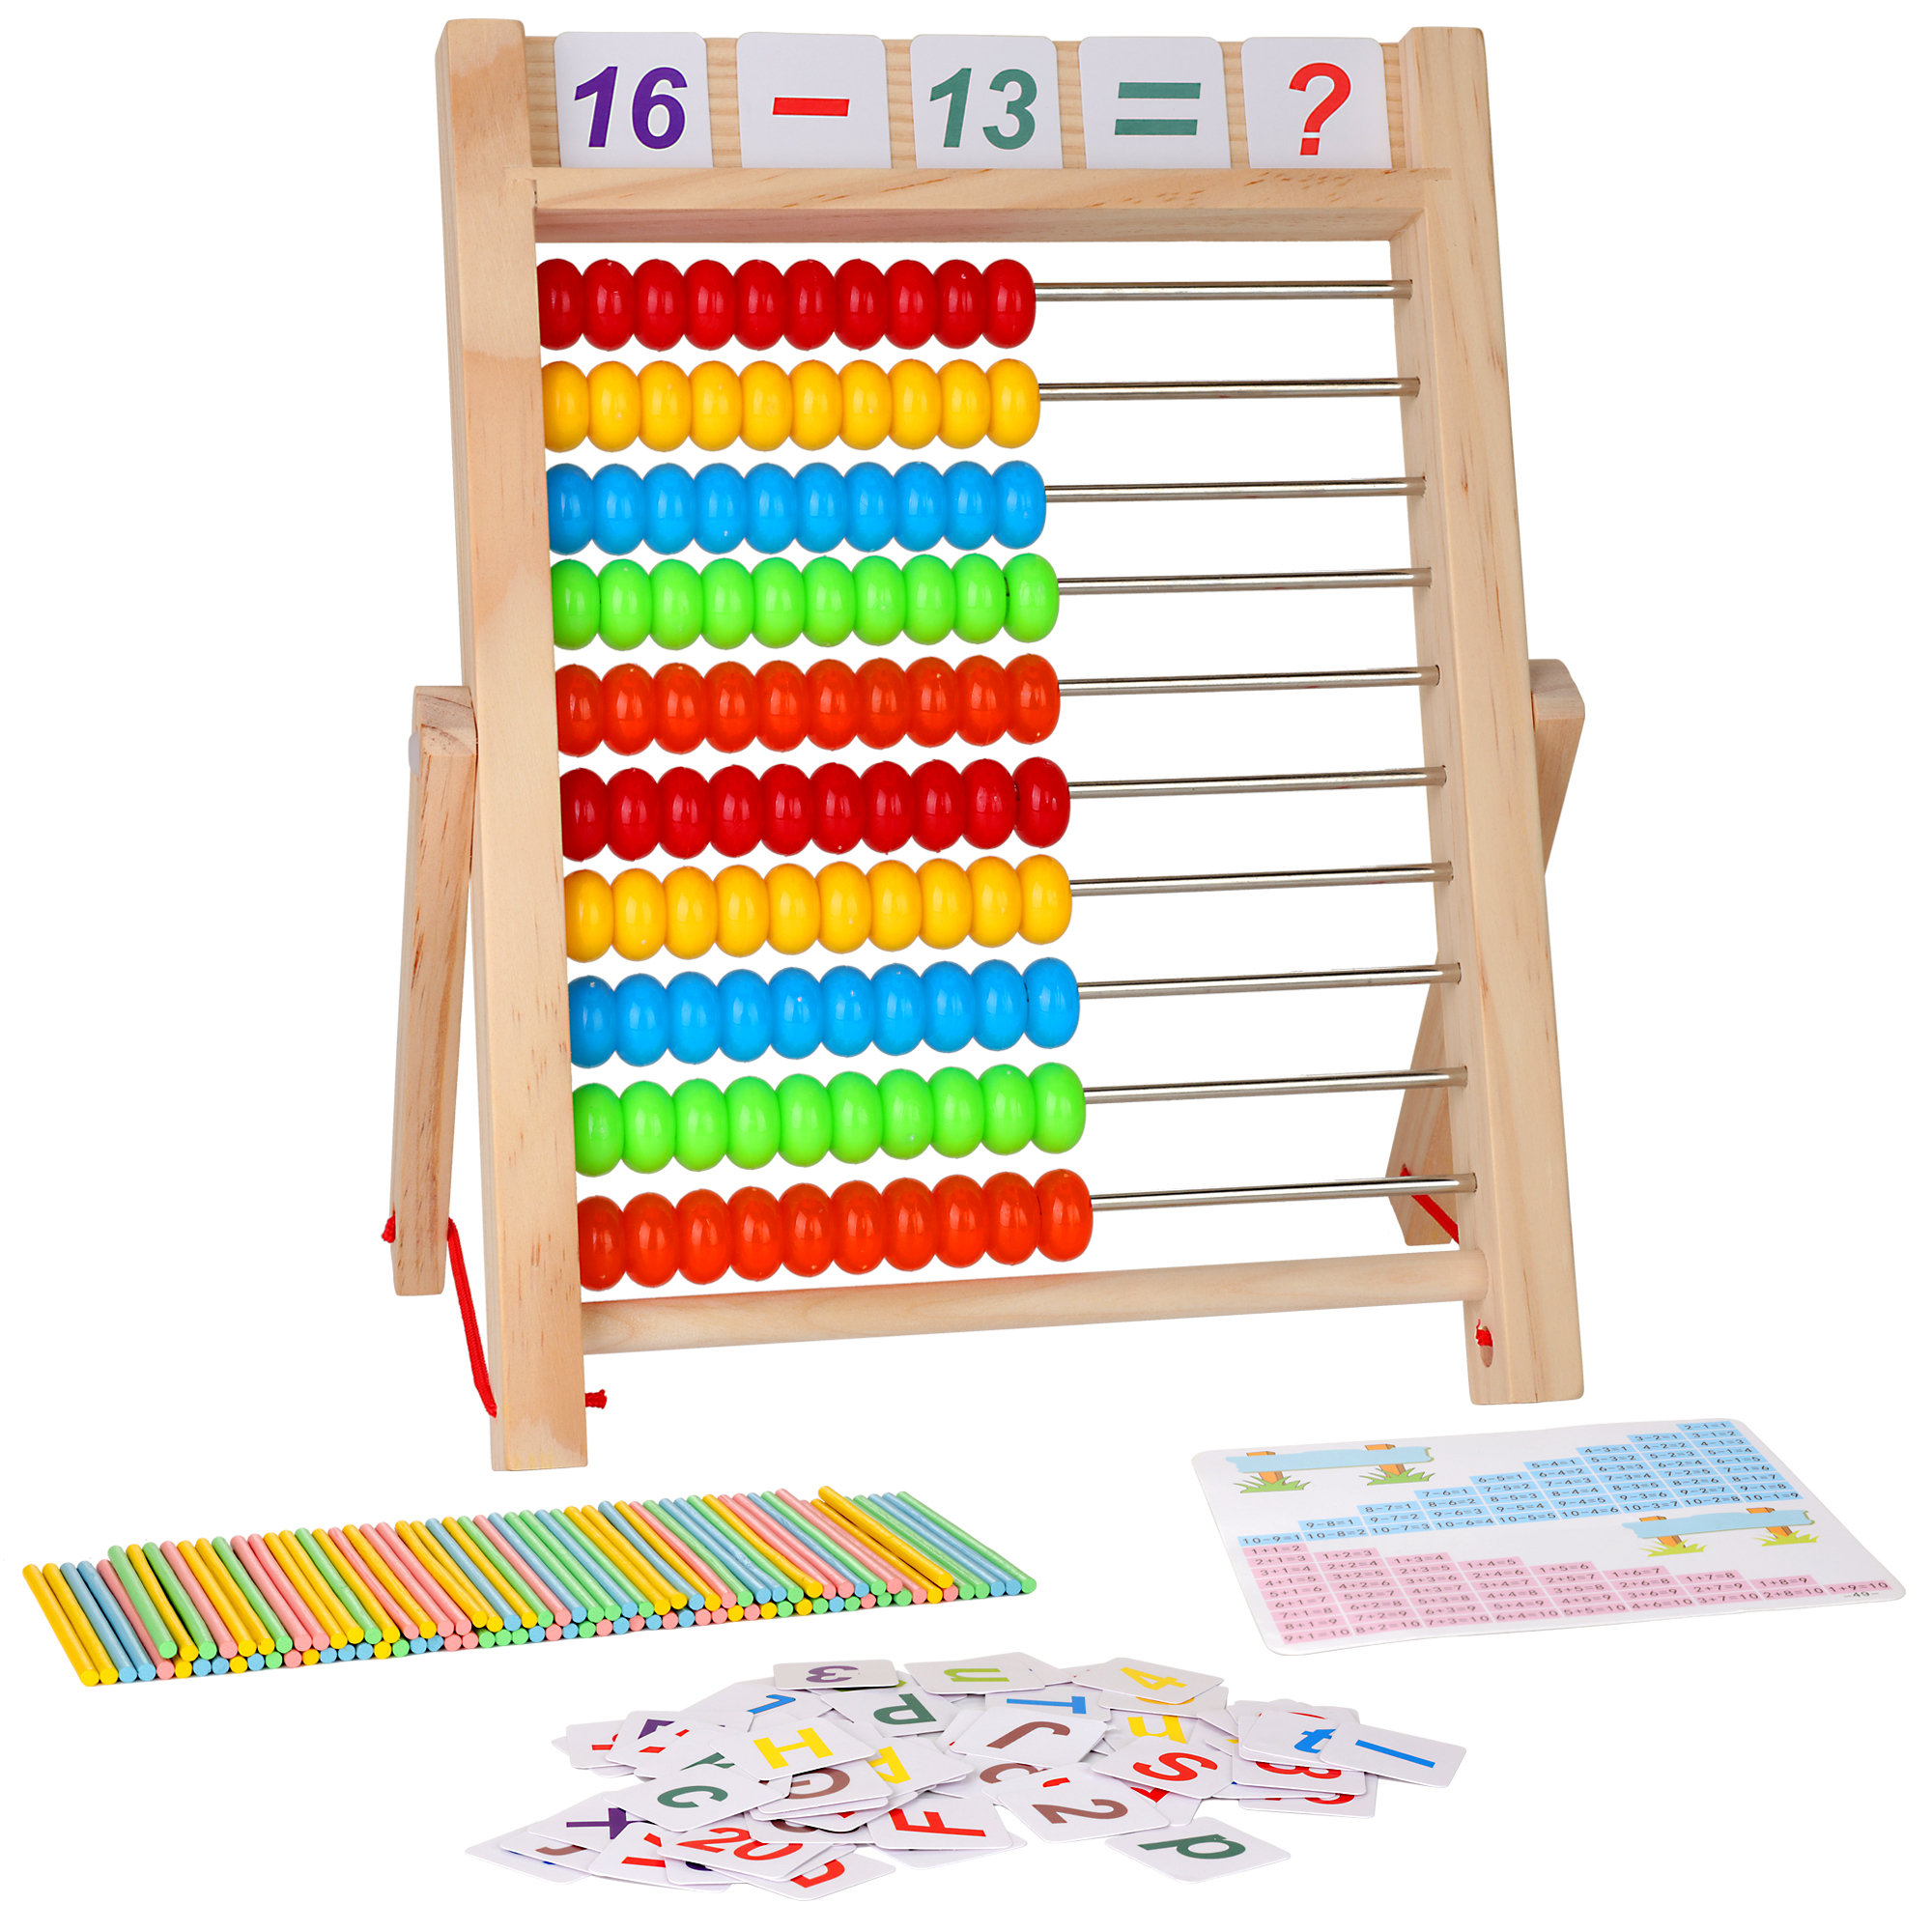 Melissa & Doug Abacus - Classic Wooden Educational Counting Toy With 100  Beads